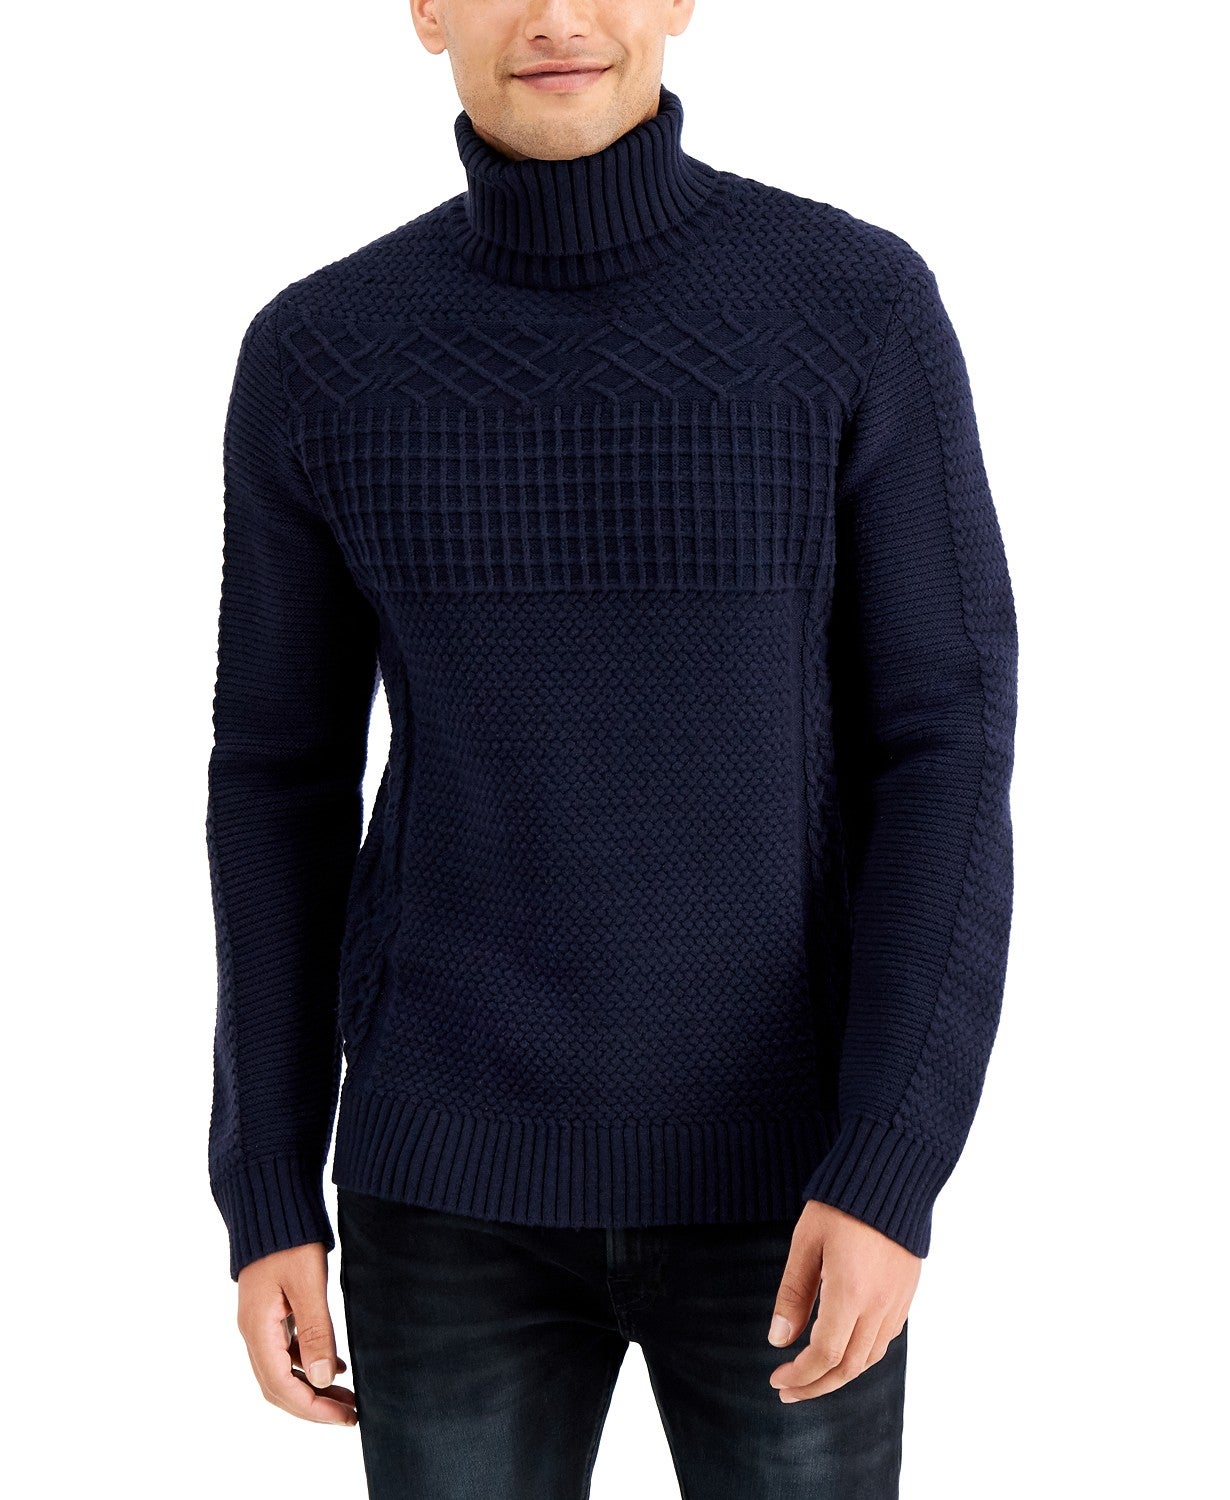 Guess Mixed Cable Turtleneck Sweater